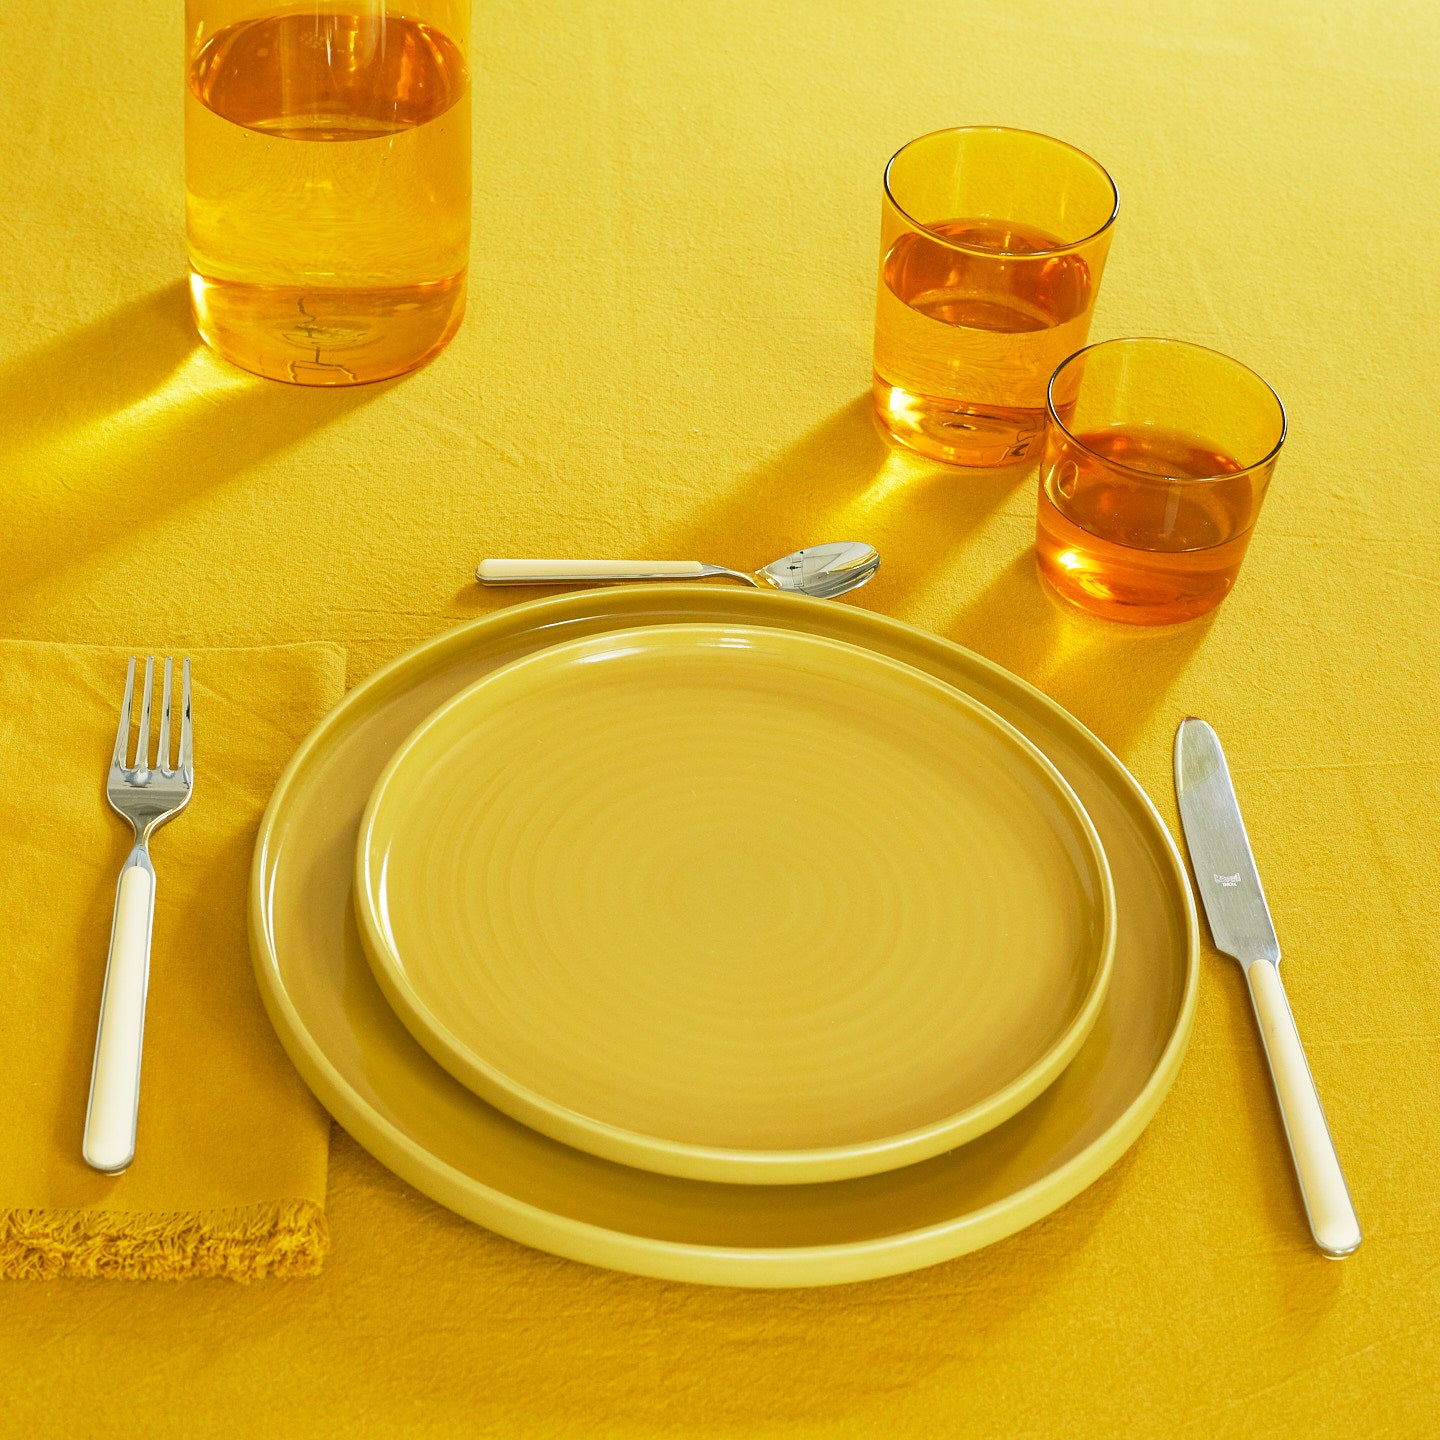 Placesetting with Essential Glassware in Amber on yellow tablecloth.